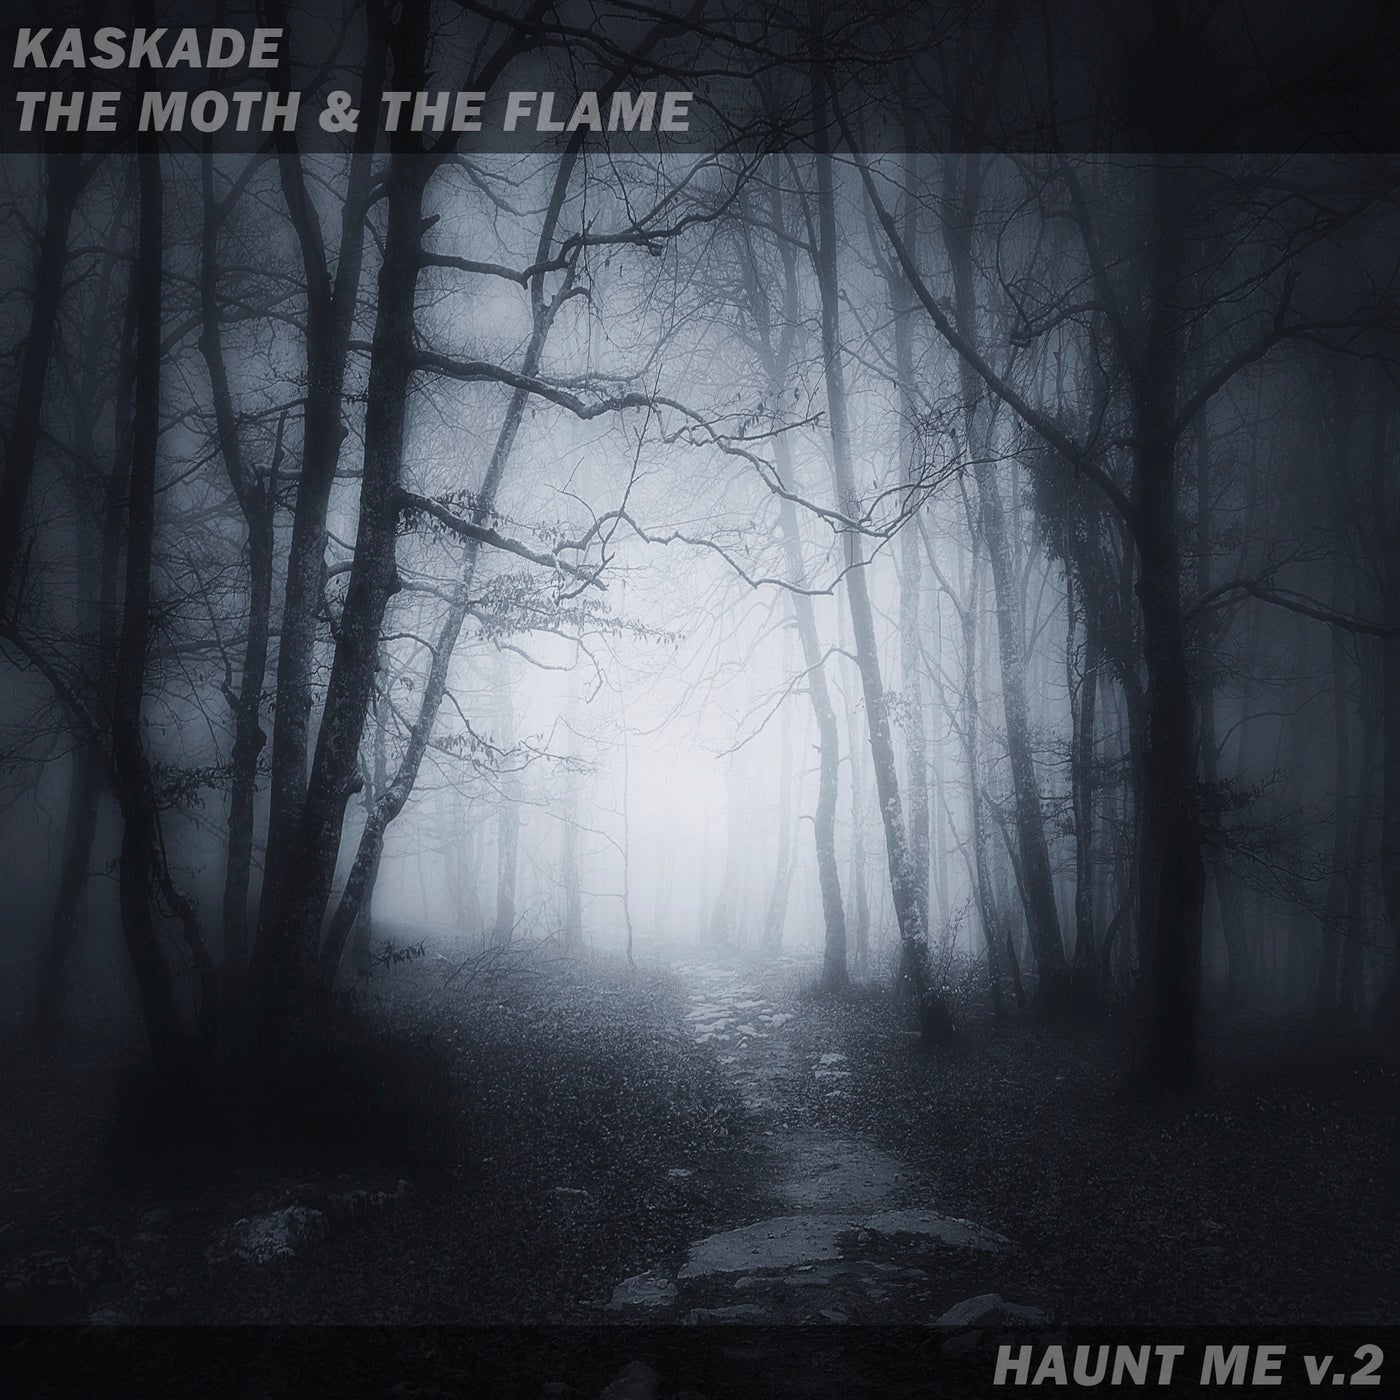 Kaskade, The Moth & The Flame - Haunt Me V.2 (Extended)